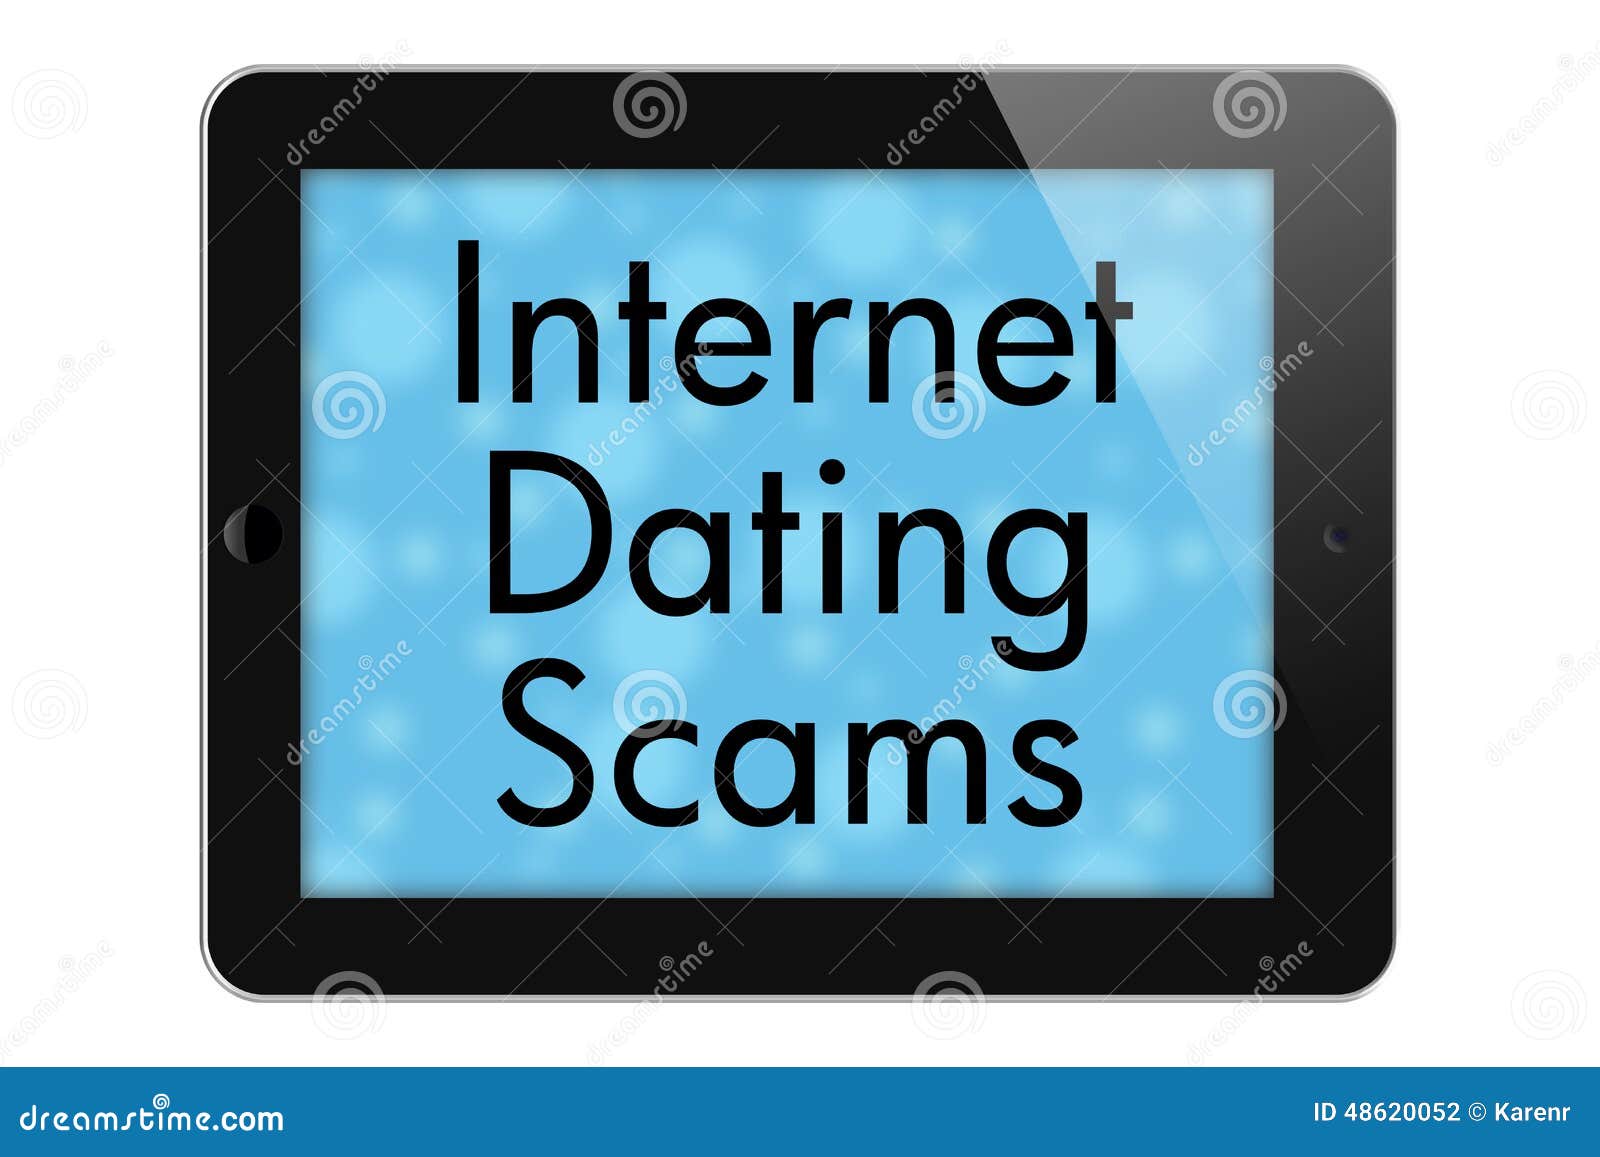 Of Internet Dating Scams 115